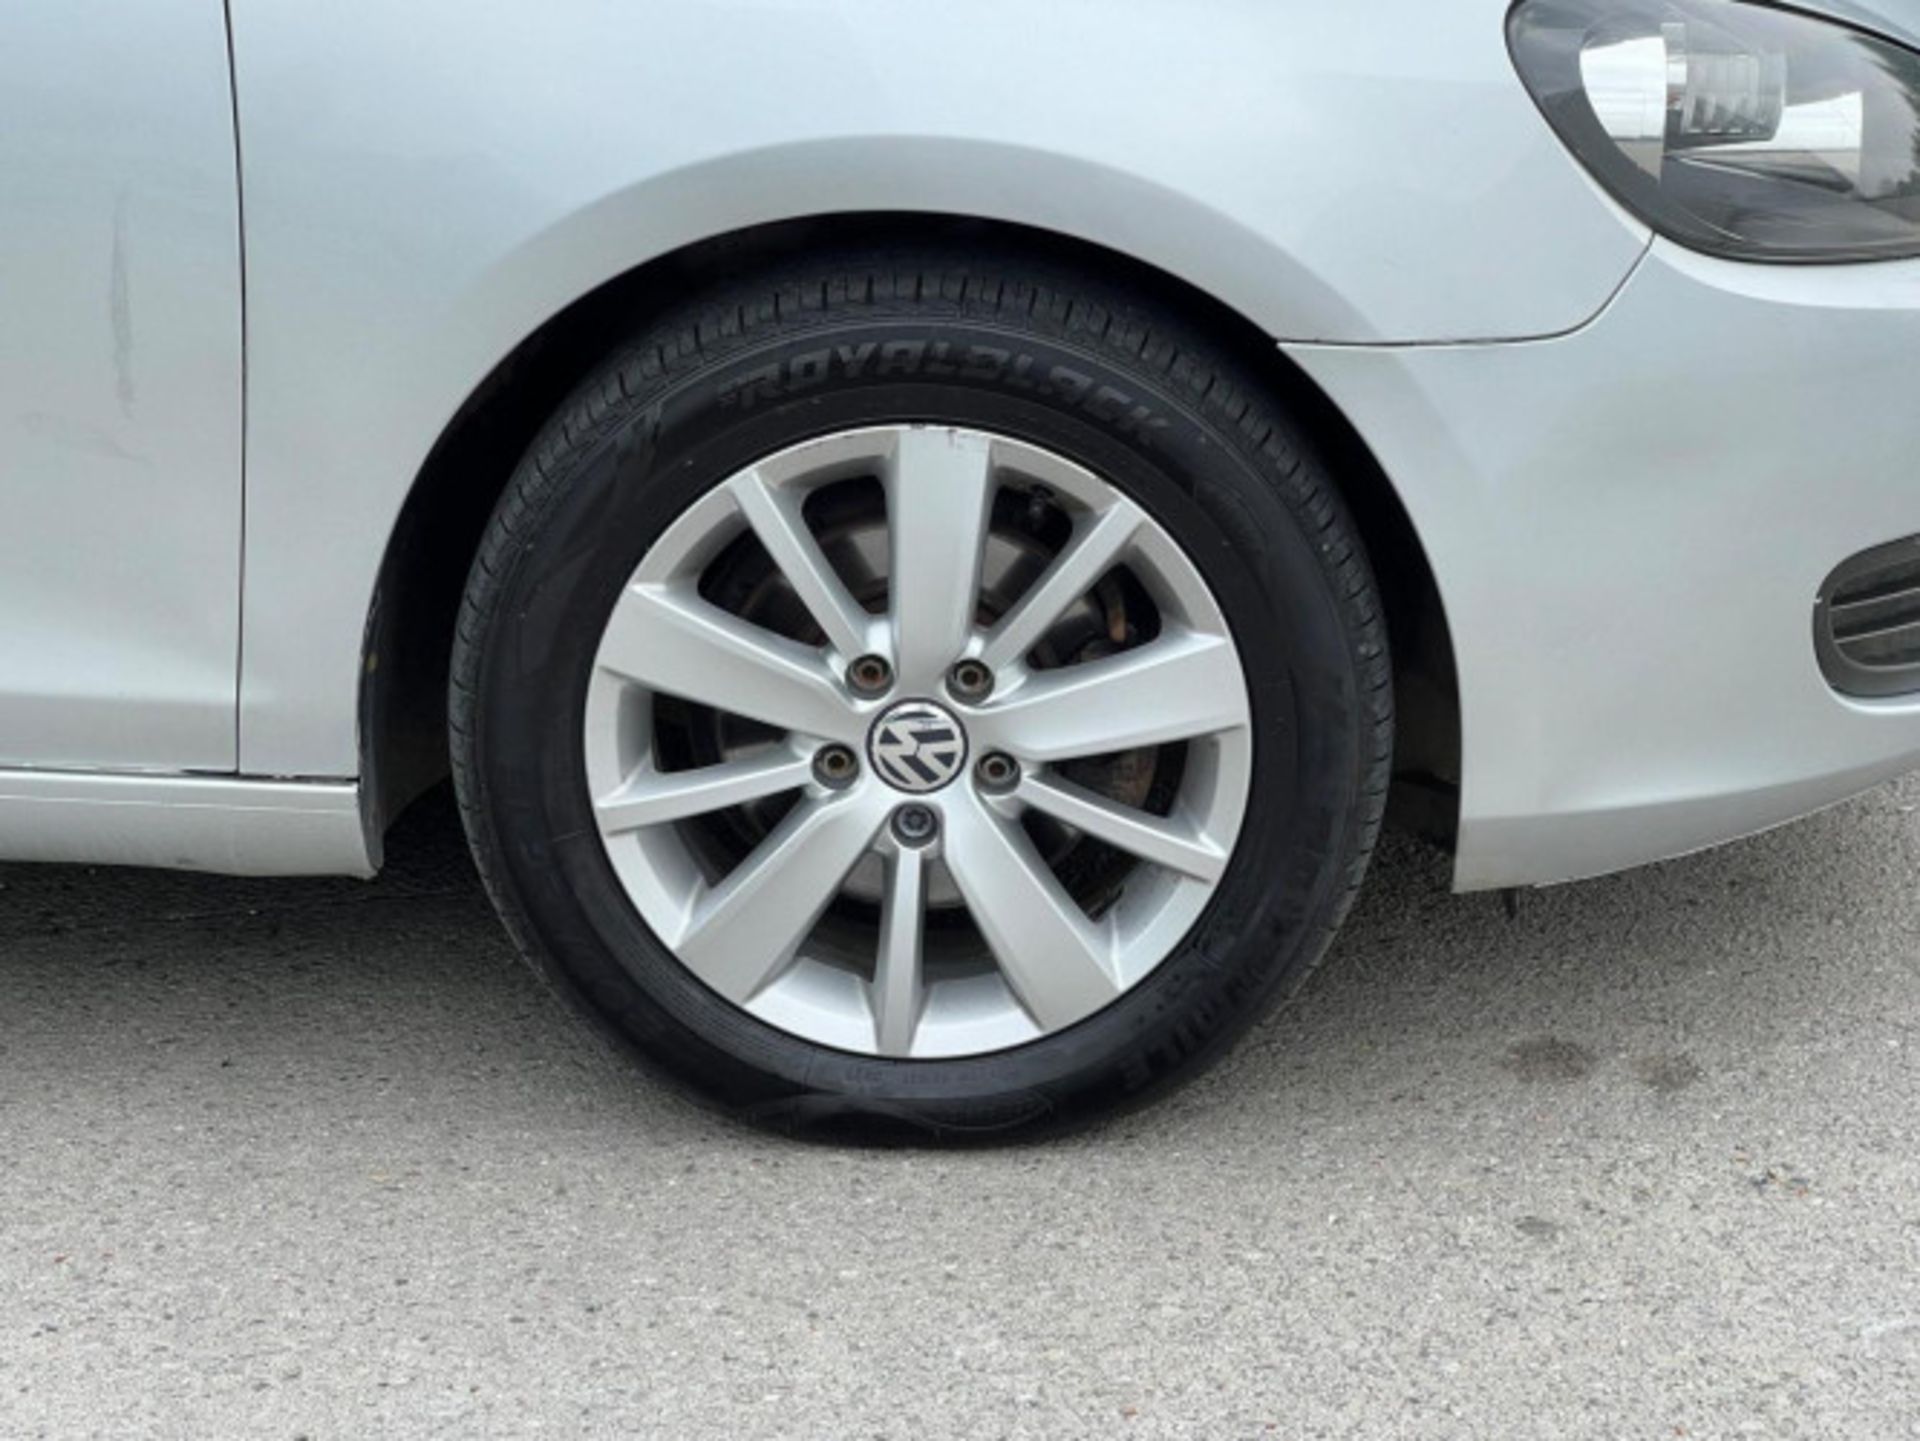 IMPECCABLE 2012 VOLKSWAGEN GOLF 1.6 TDI MATCH >>--NO VAT ON HAMMER--<< - Image 105 of 116